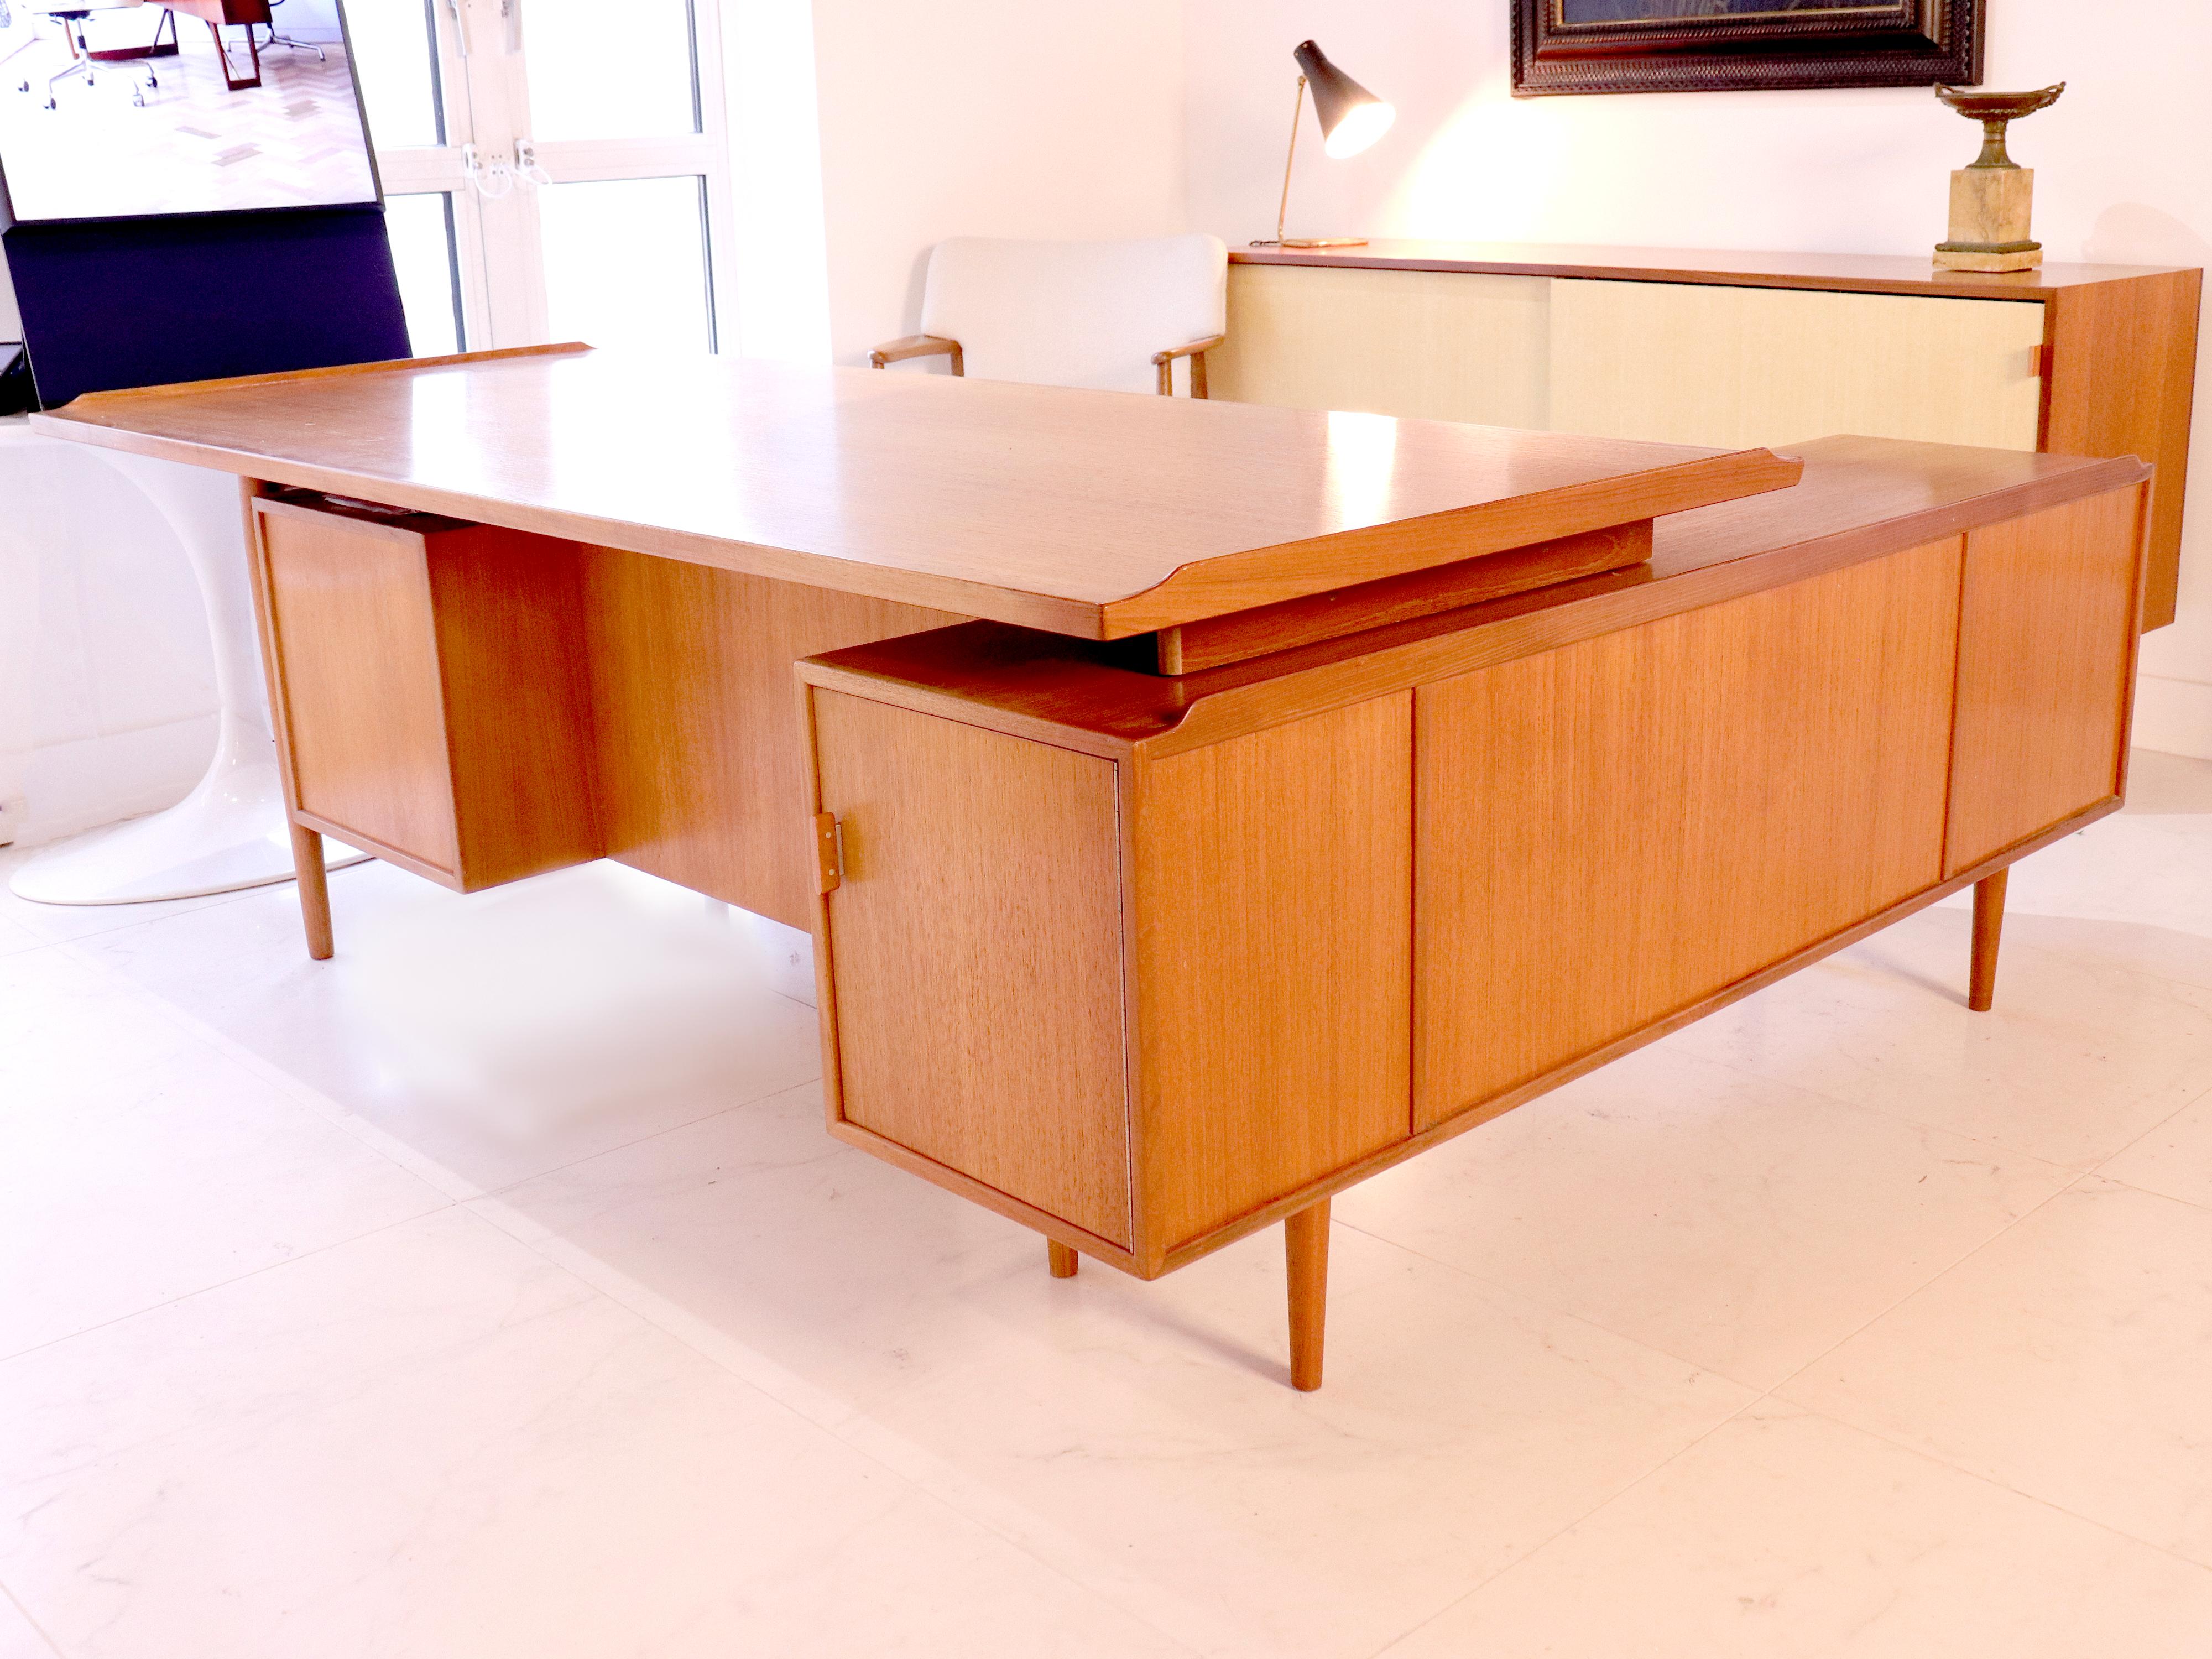 Executive Teak Writing Desk by Arne Vodder for Sibast, Denmark 1960s In Good Condition For Sale In London, GB